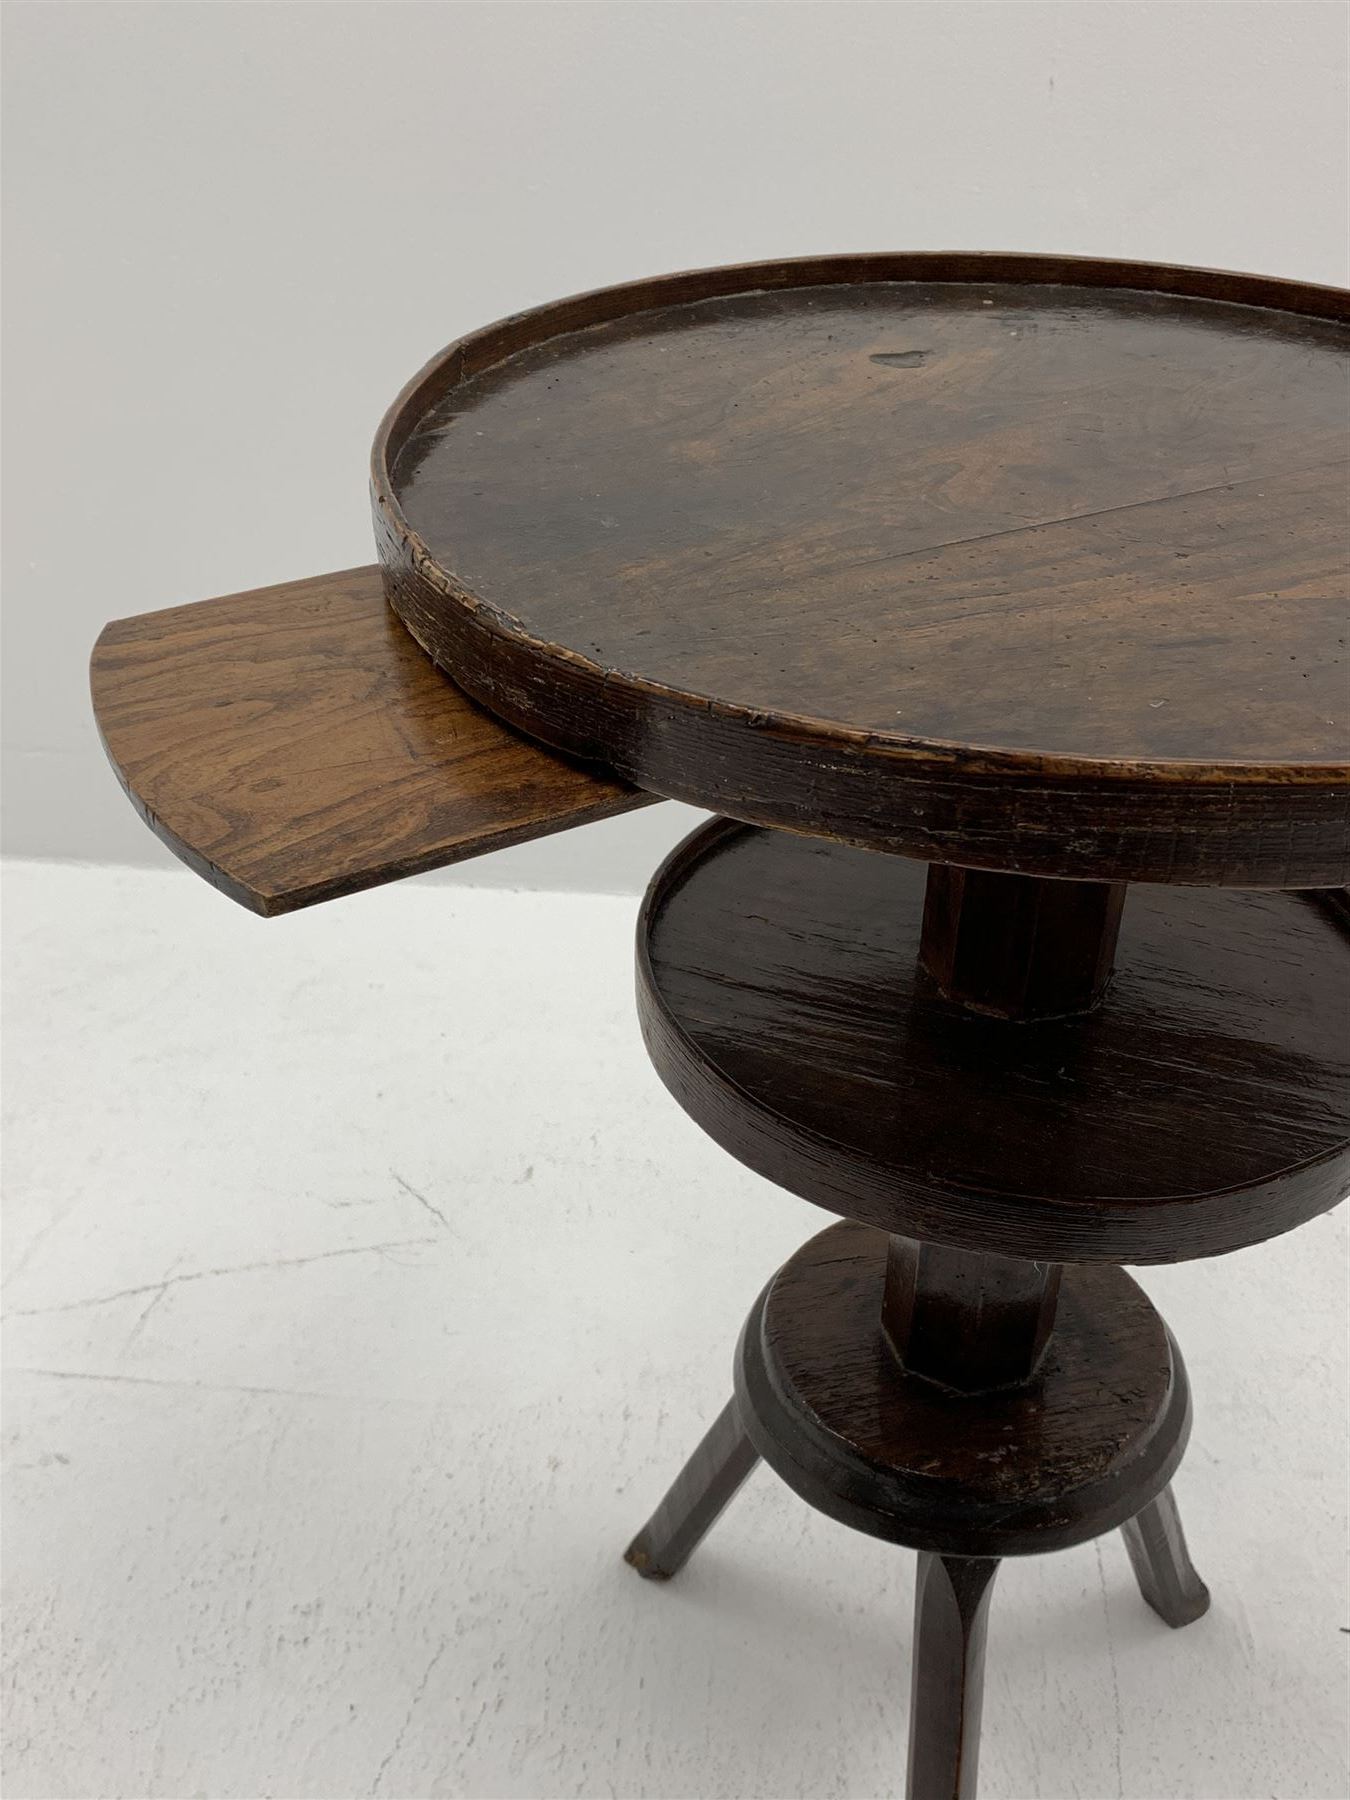 Unusual mid 18th century elm and fruitwood cricket tripod table or candle stand - Image 4 of 9